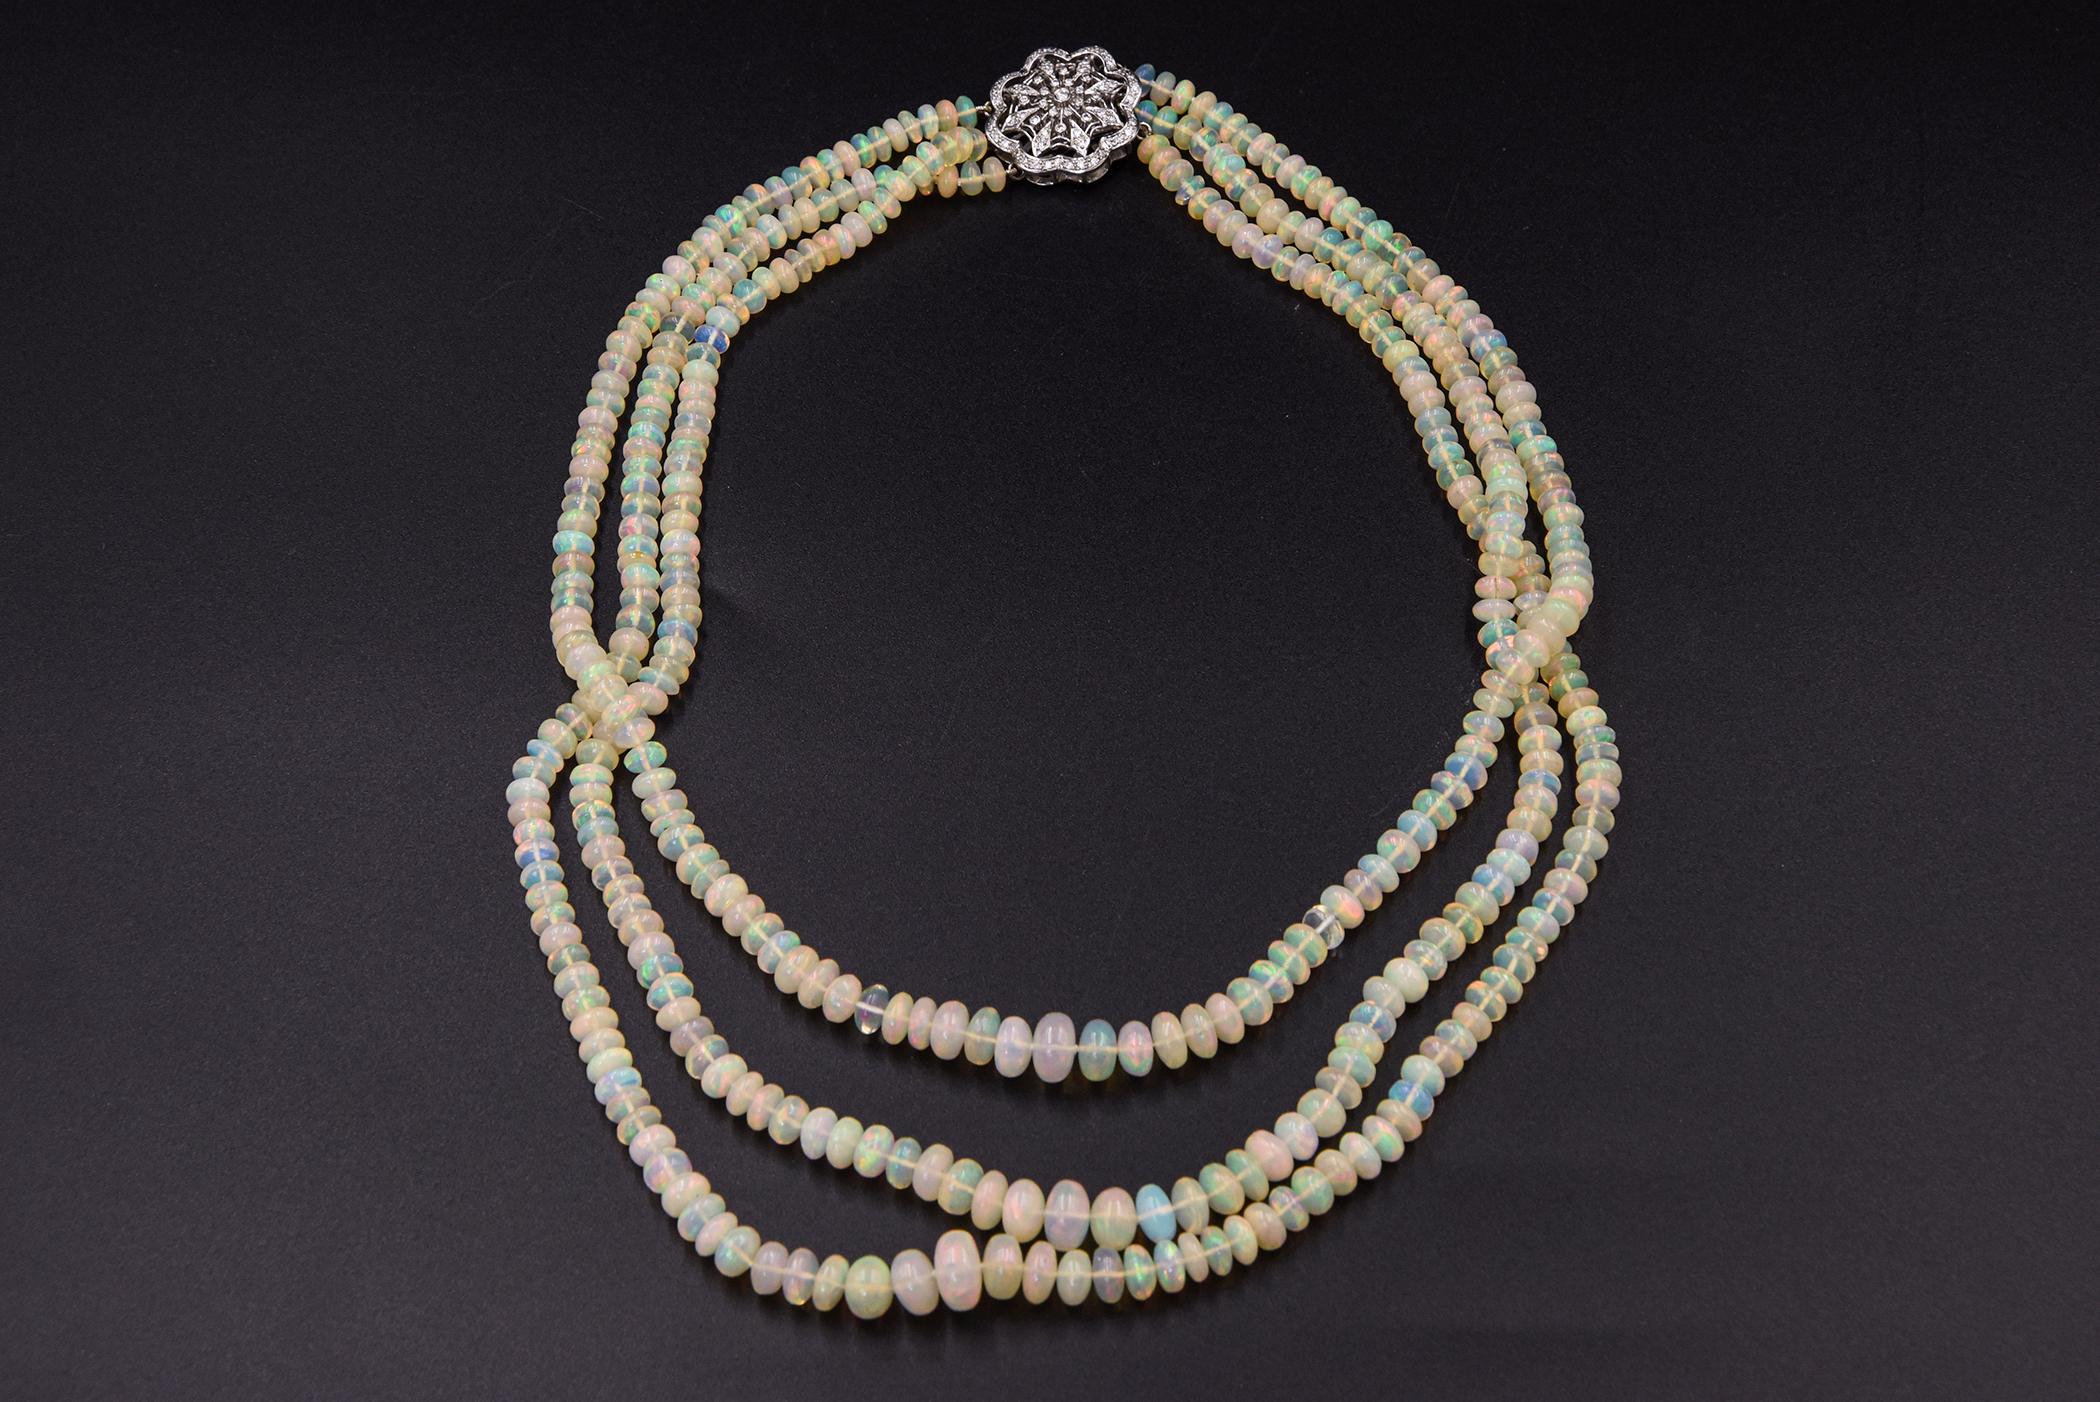 Opal Bead Graduated Triple Strand Necklace with Diamond White Gold Clasp In Excellent Condition For Sale In Miami Beach, FL